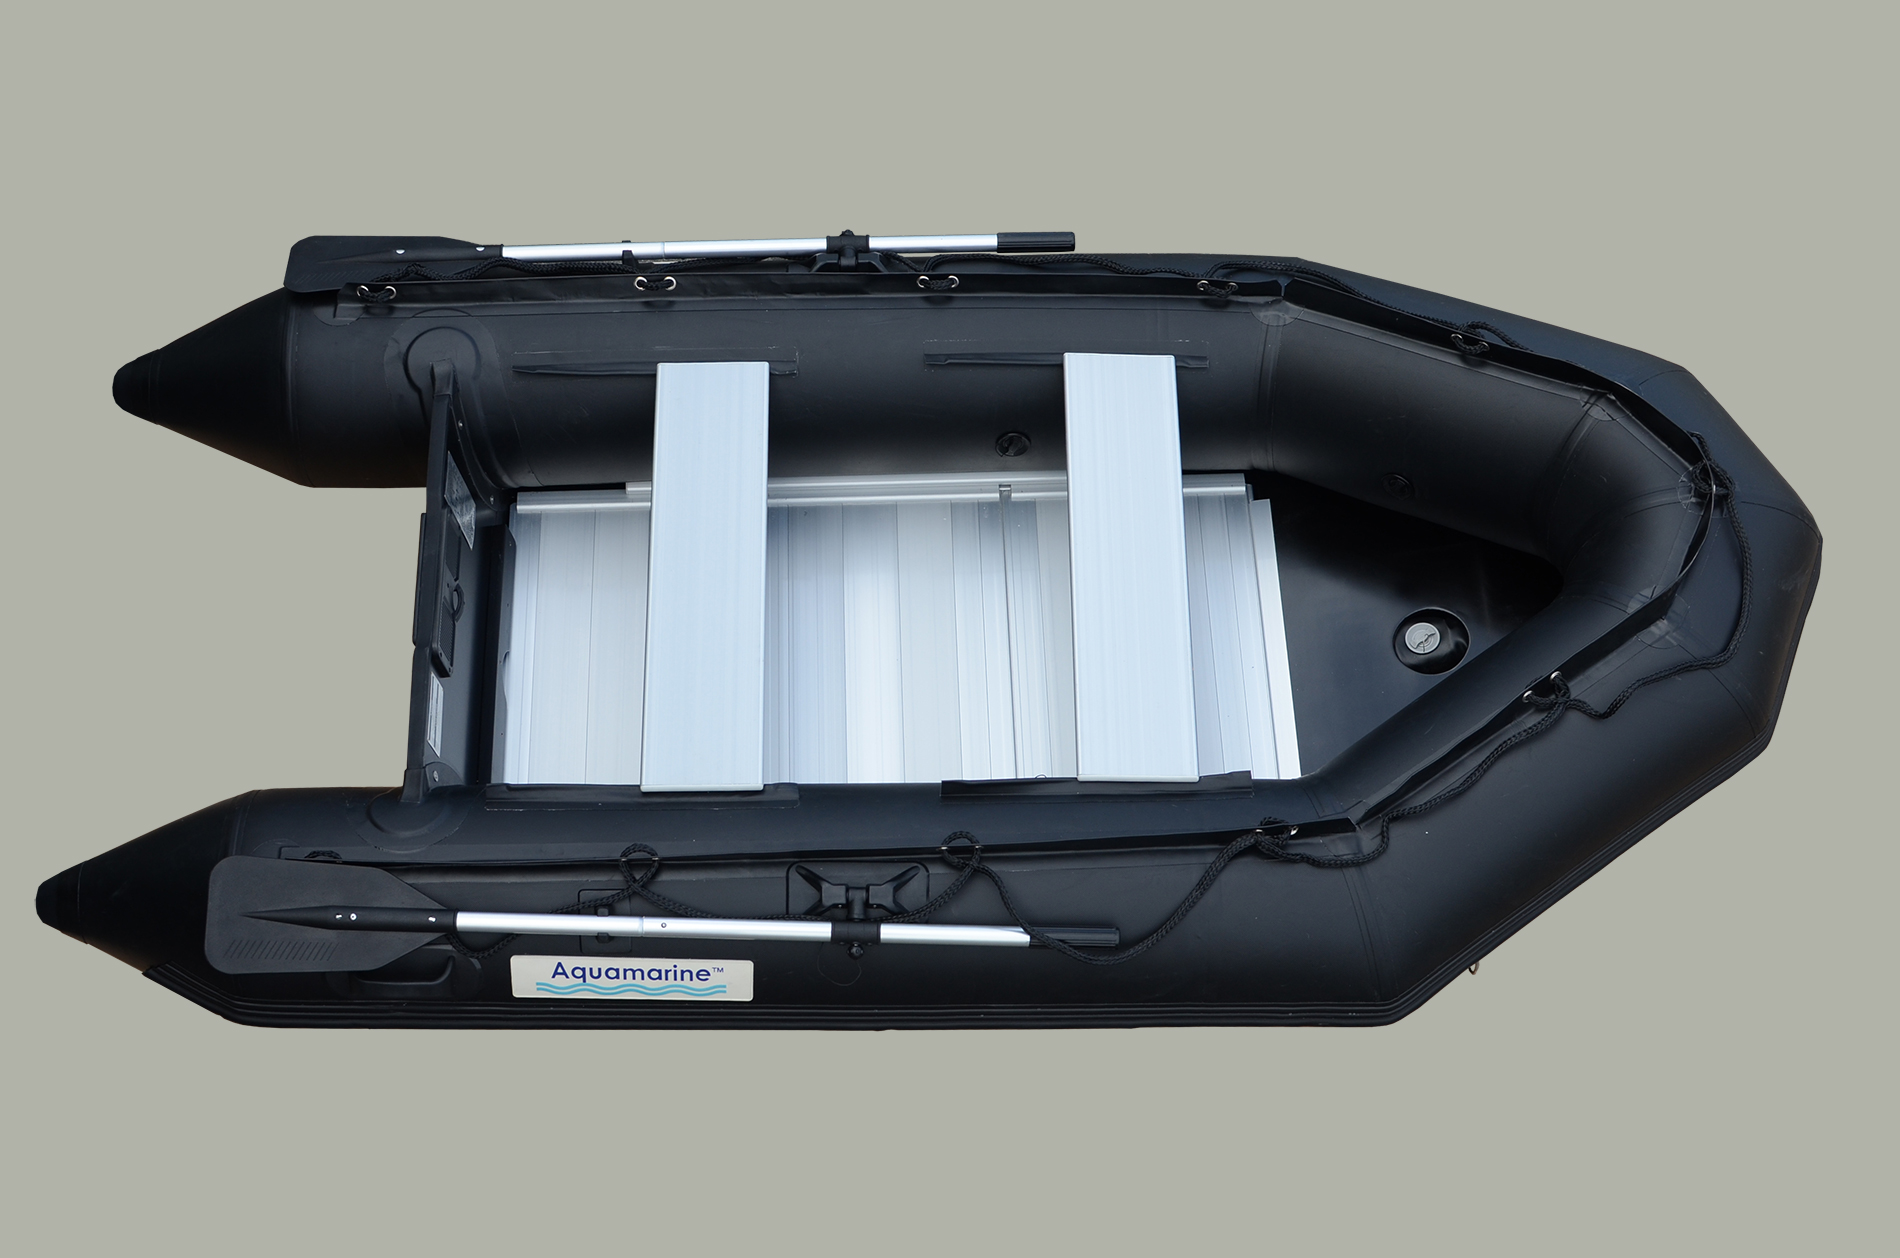 10 FT INFLATABLE BOAT MIlitary BLACK